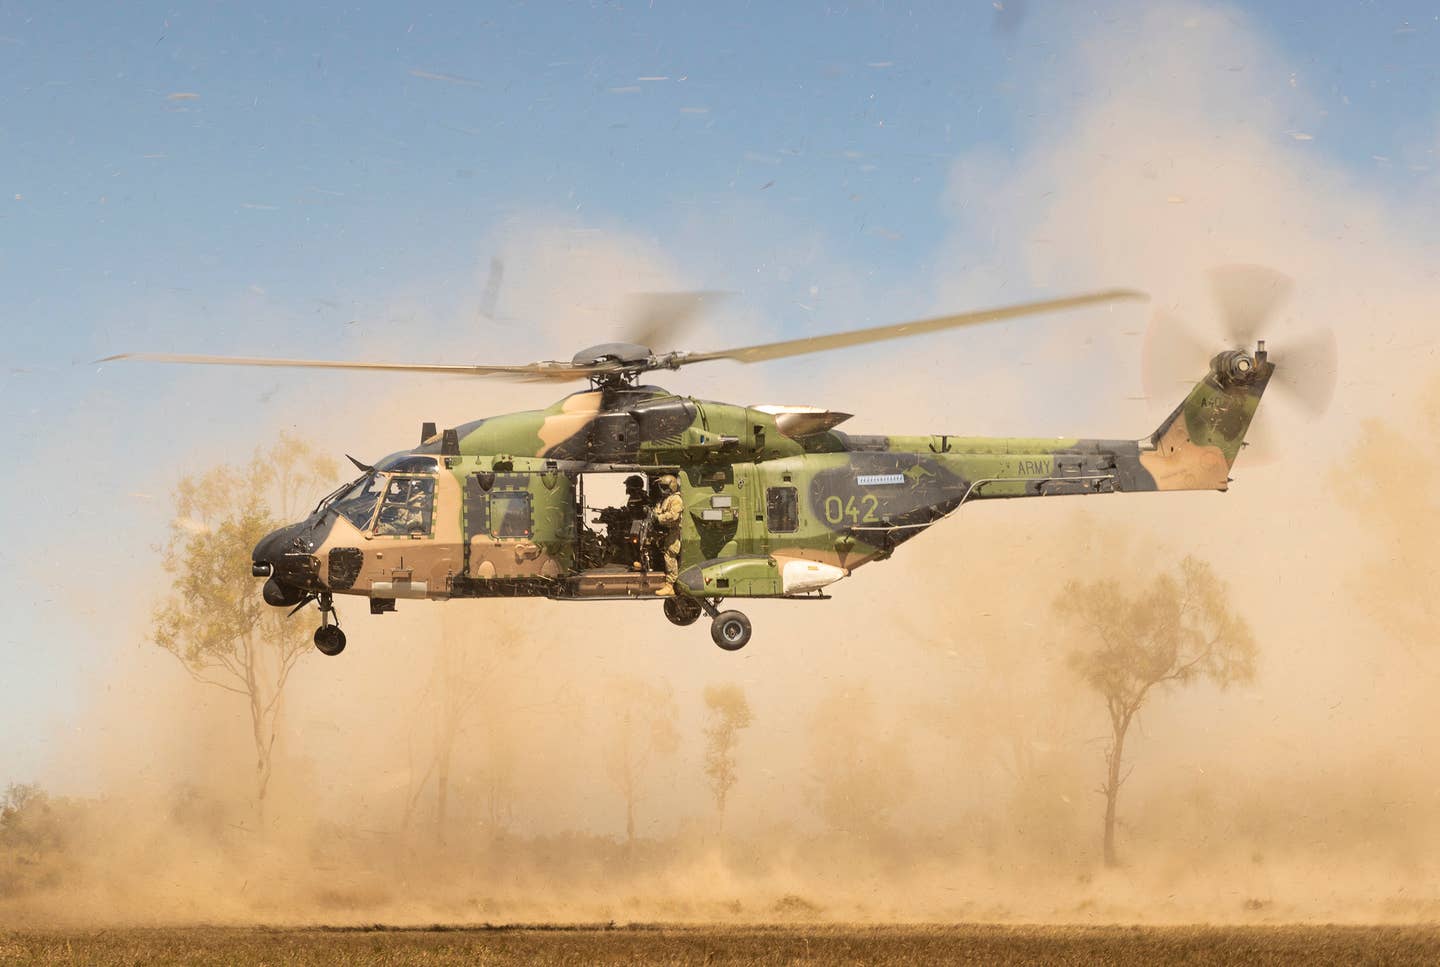 An Australian Army MRH90 Taipan from the 5th Aviation Regiment lands as part of air mobility operations with the 3rd Battalion, The Royal Australian Regiment on Exercise Brolga Run 23 at Townsville Field Training Area, Townsville, Queensland. <em>COMMONWEALTH OF AUSTRALIA, DEPARTMENT OF DEFENSE</em>